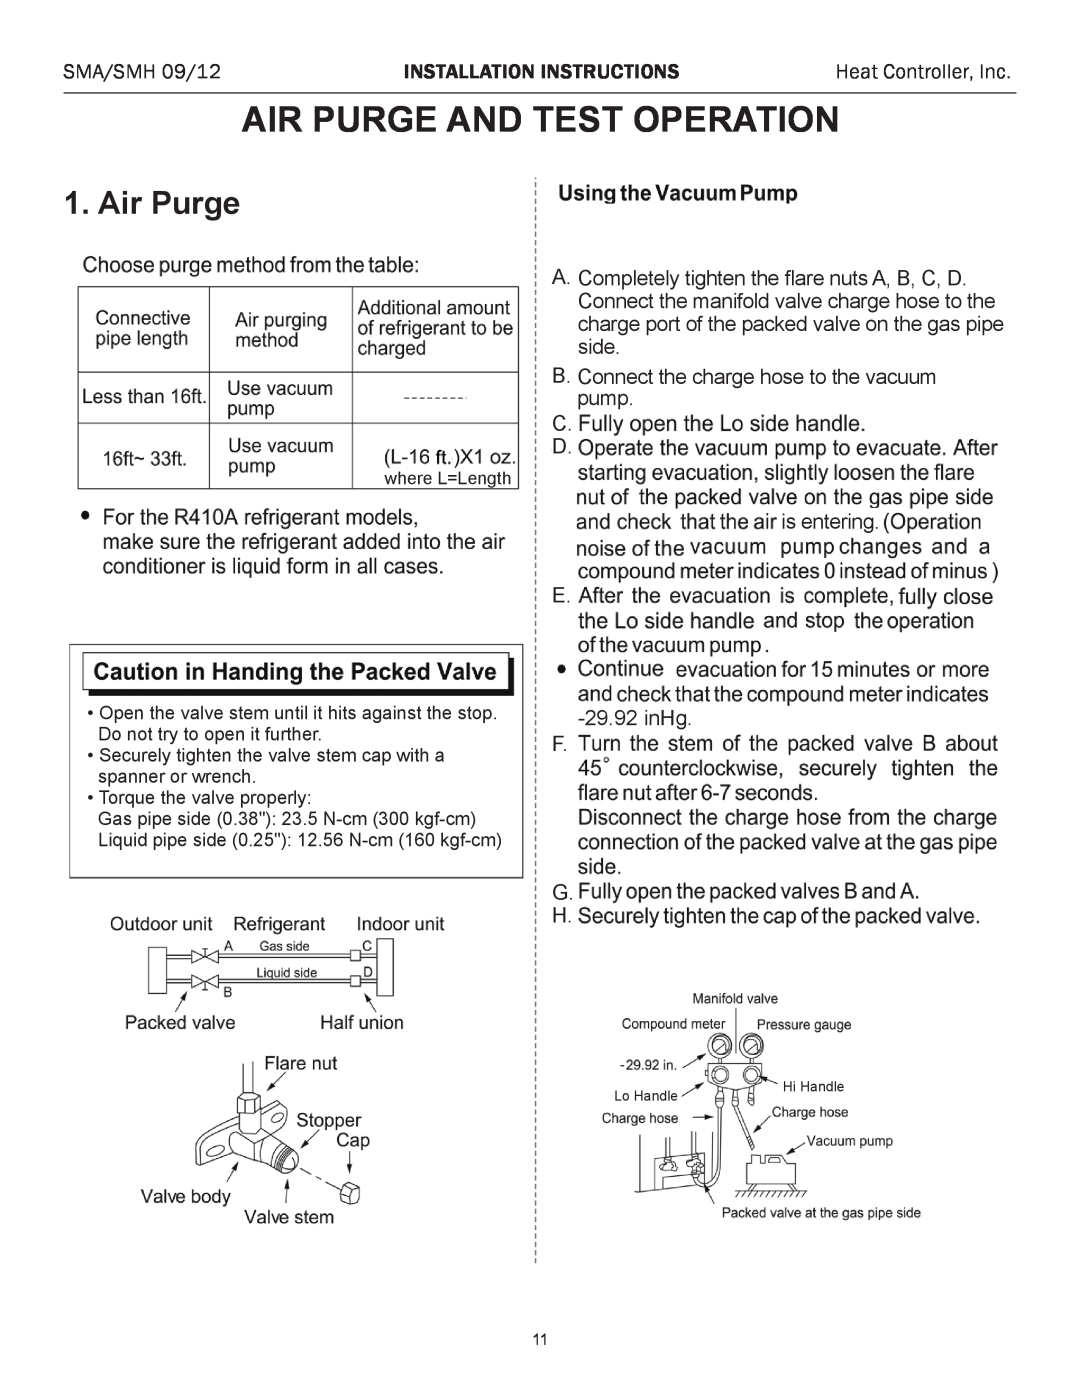 Heat Controller SMH 12, SMA 12, SMA/SMH 09/12 installation instructions Air Purge And Test Operation 